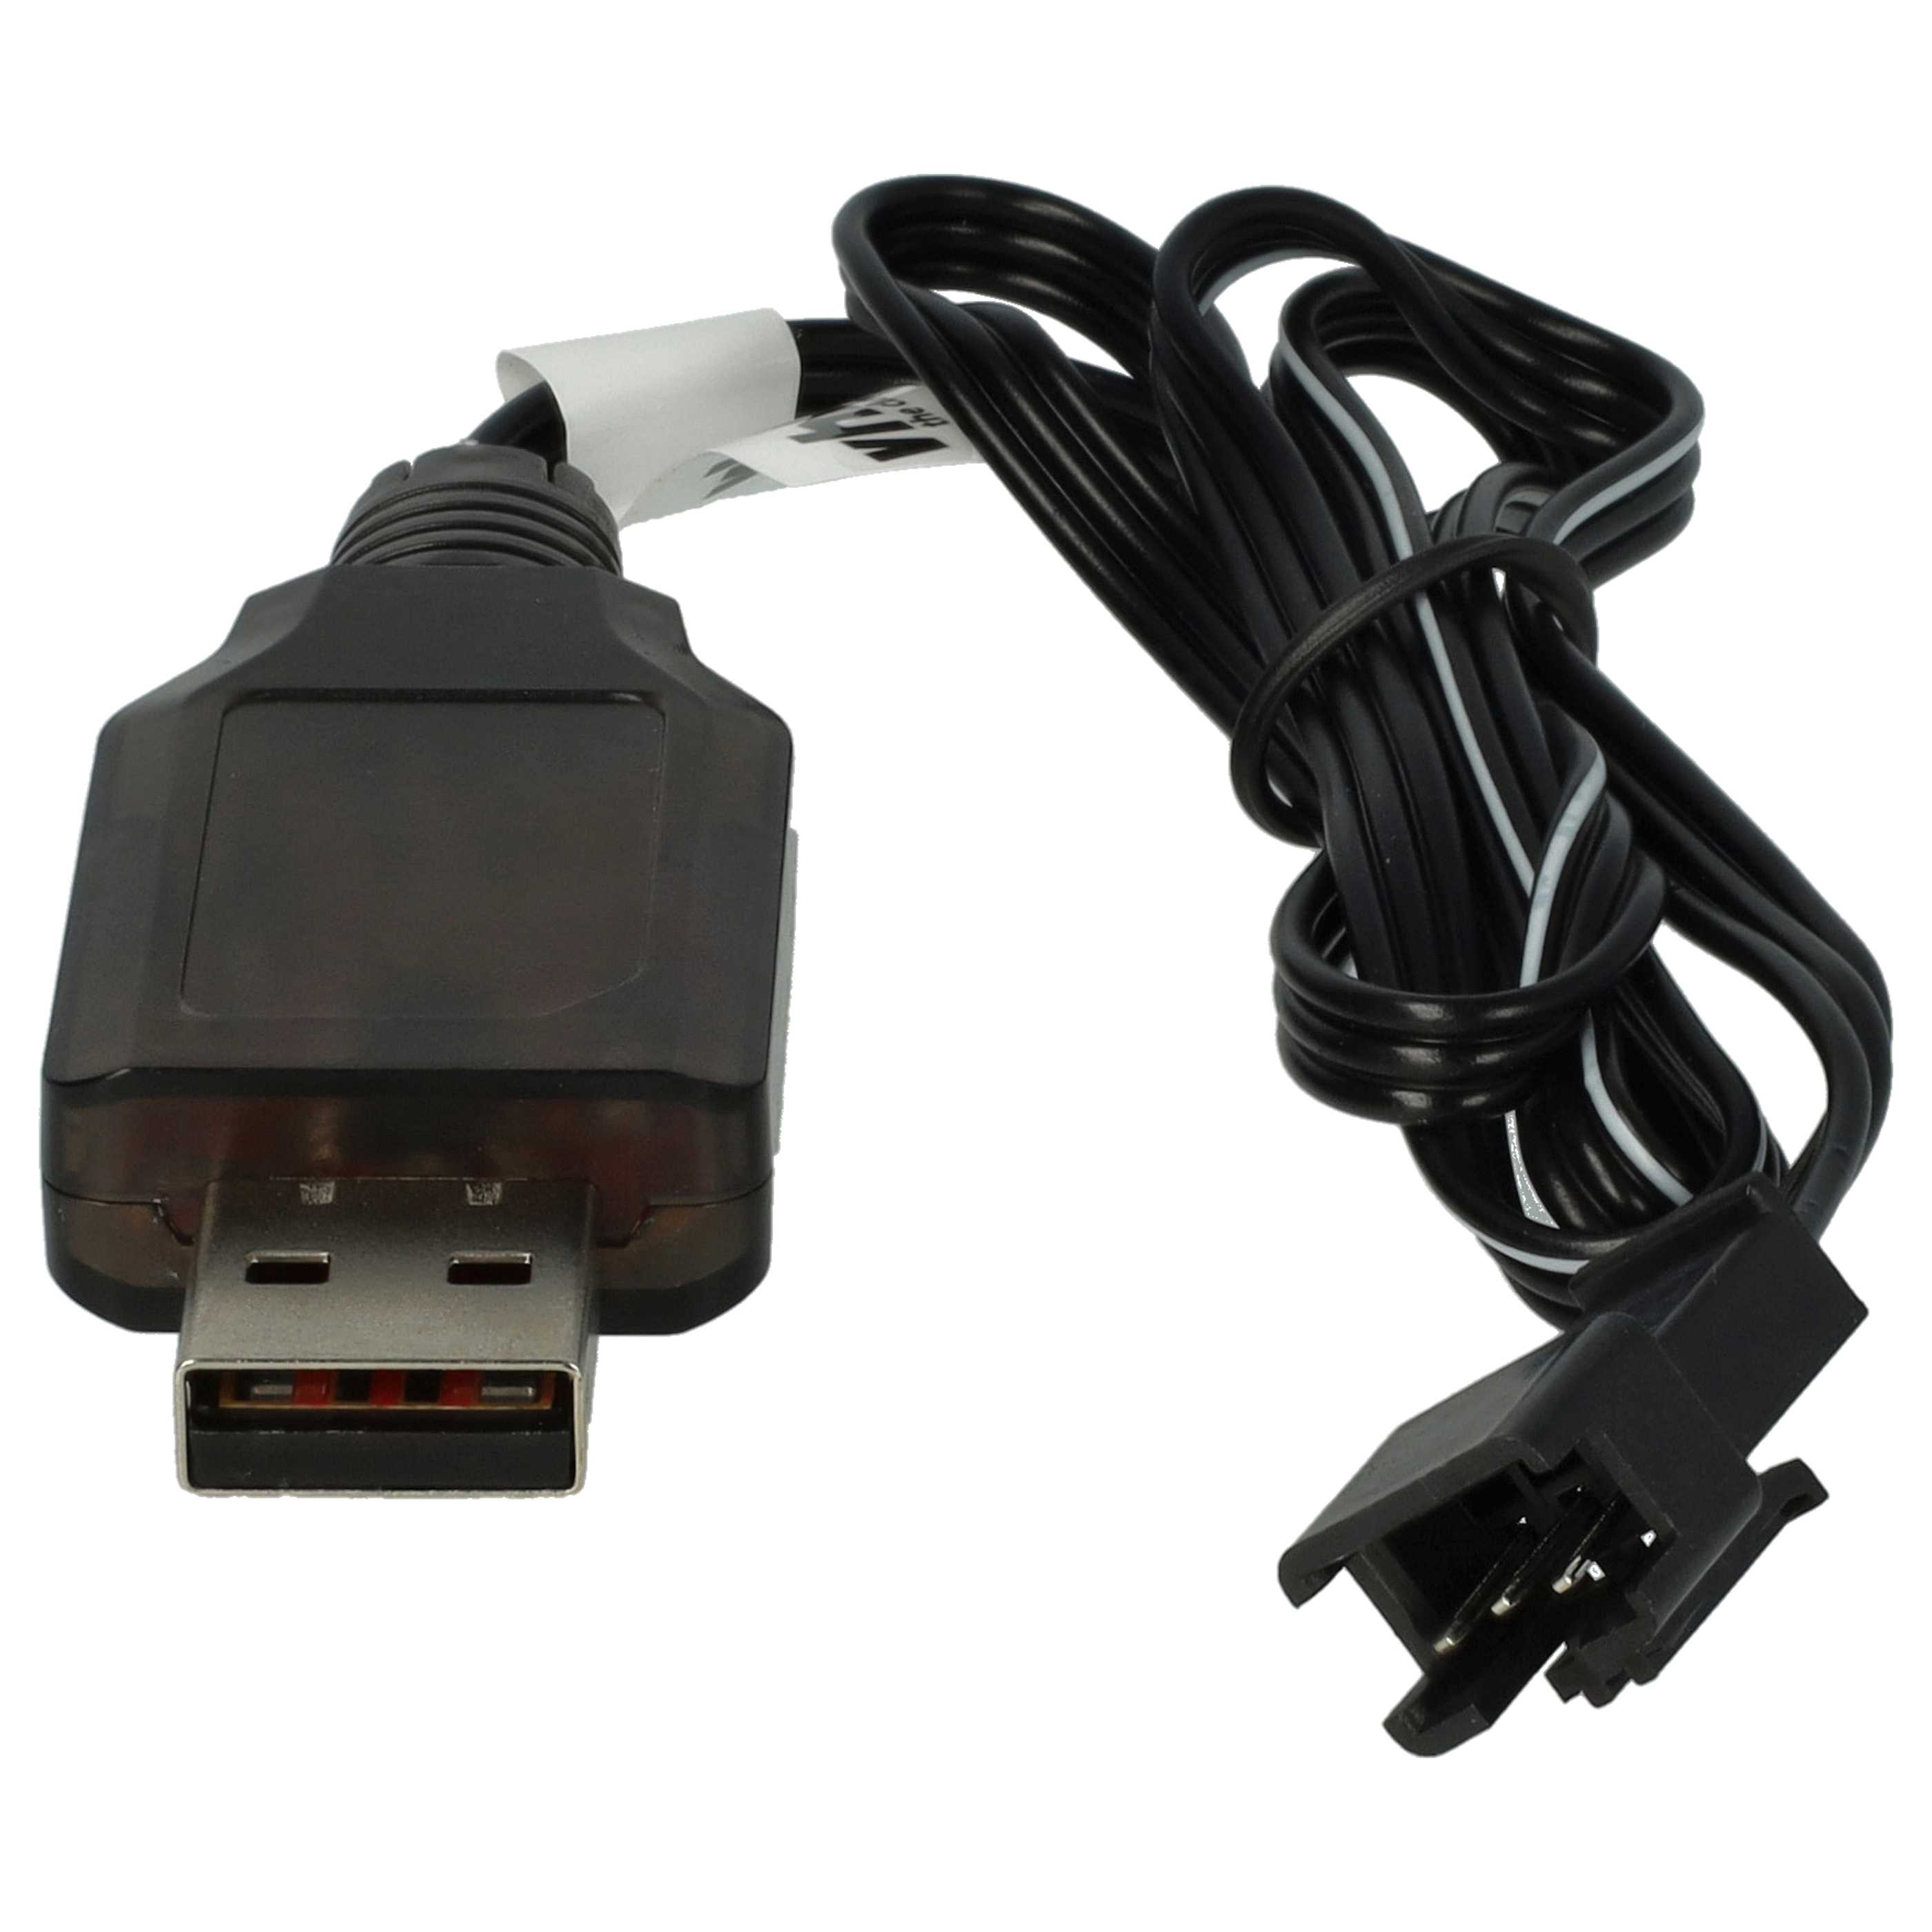 USB Charging Cable suitable for RC Batteries with SM-3P Connector, RC Model Making Battery Packs - 60 cm 6.4 V